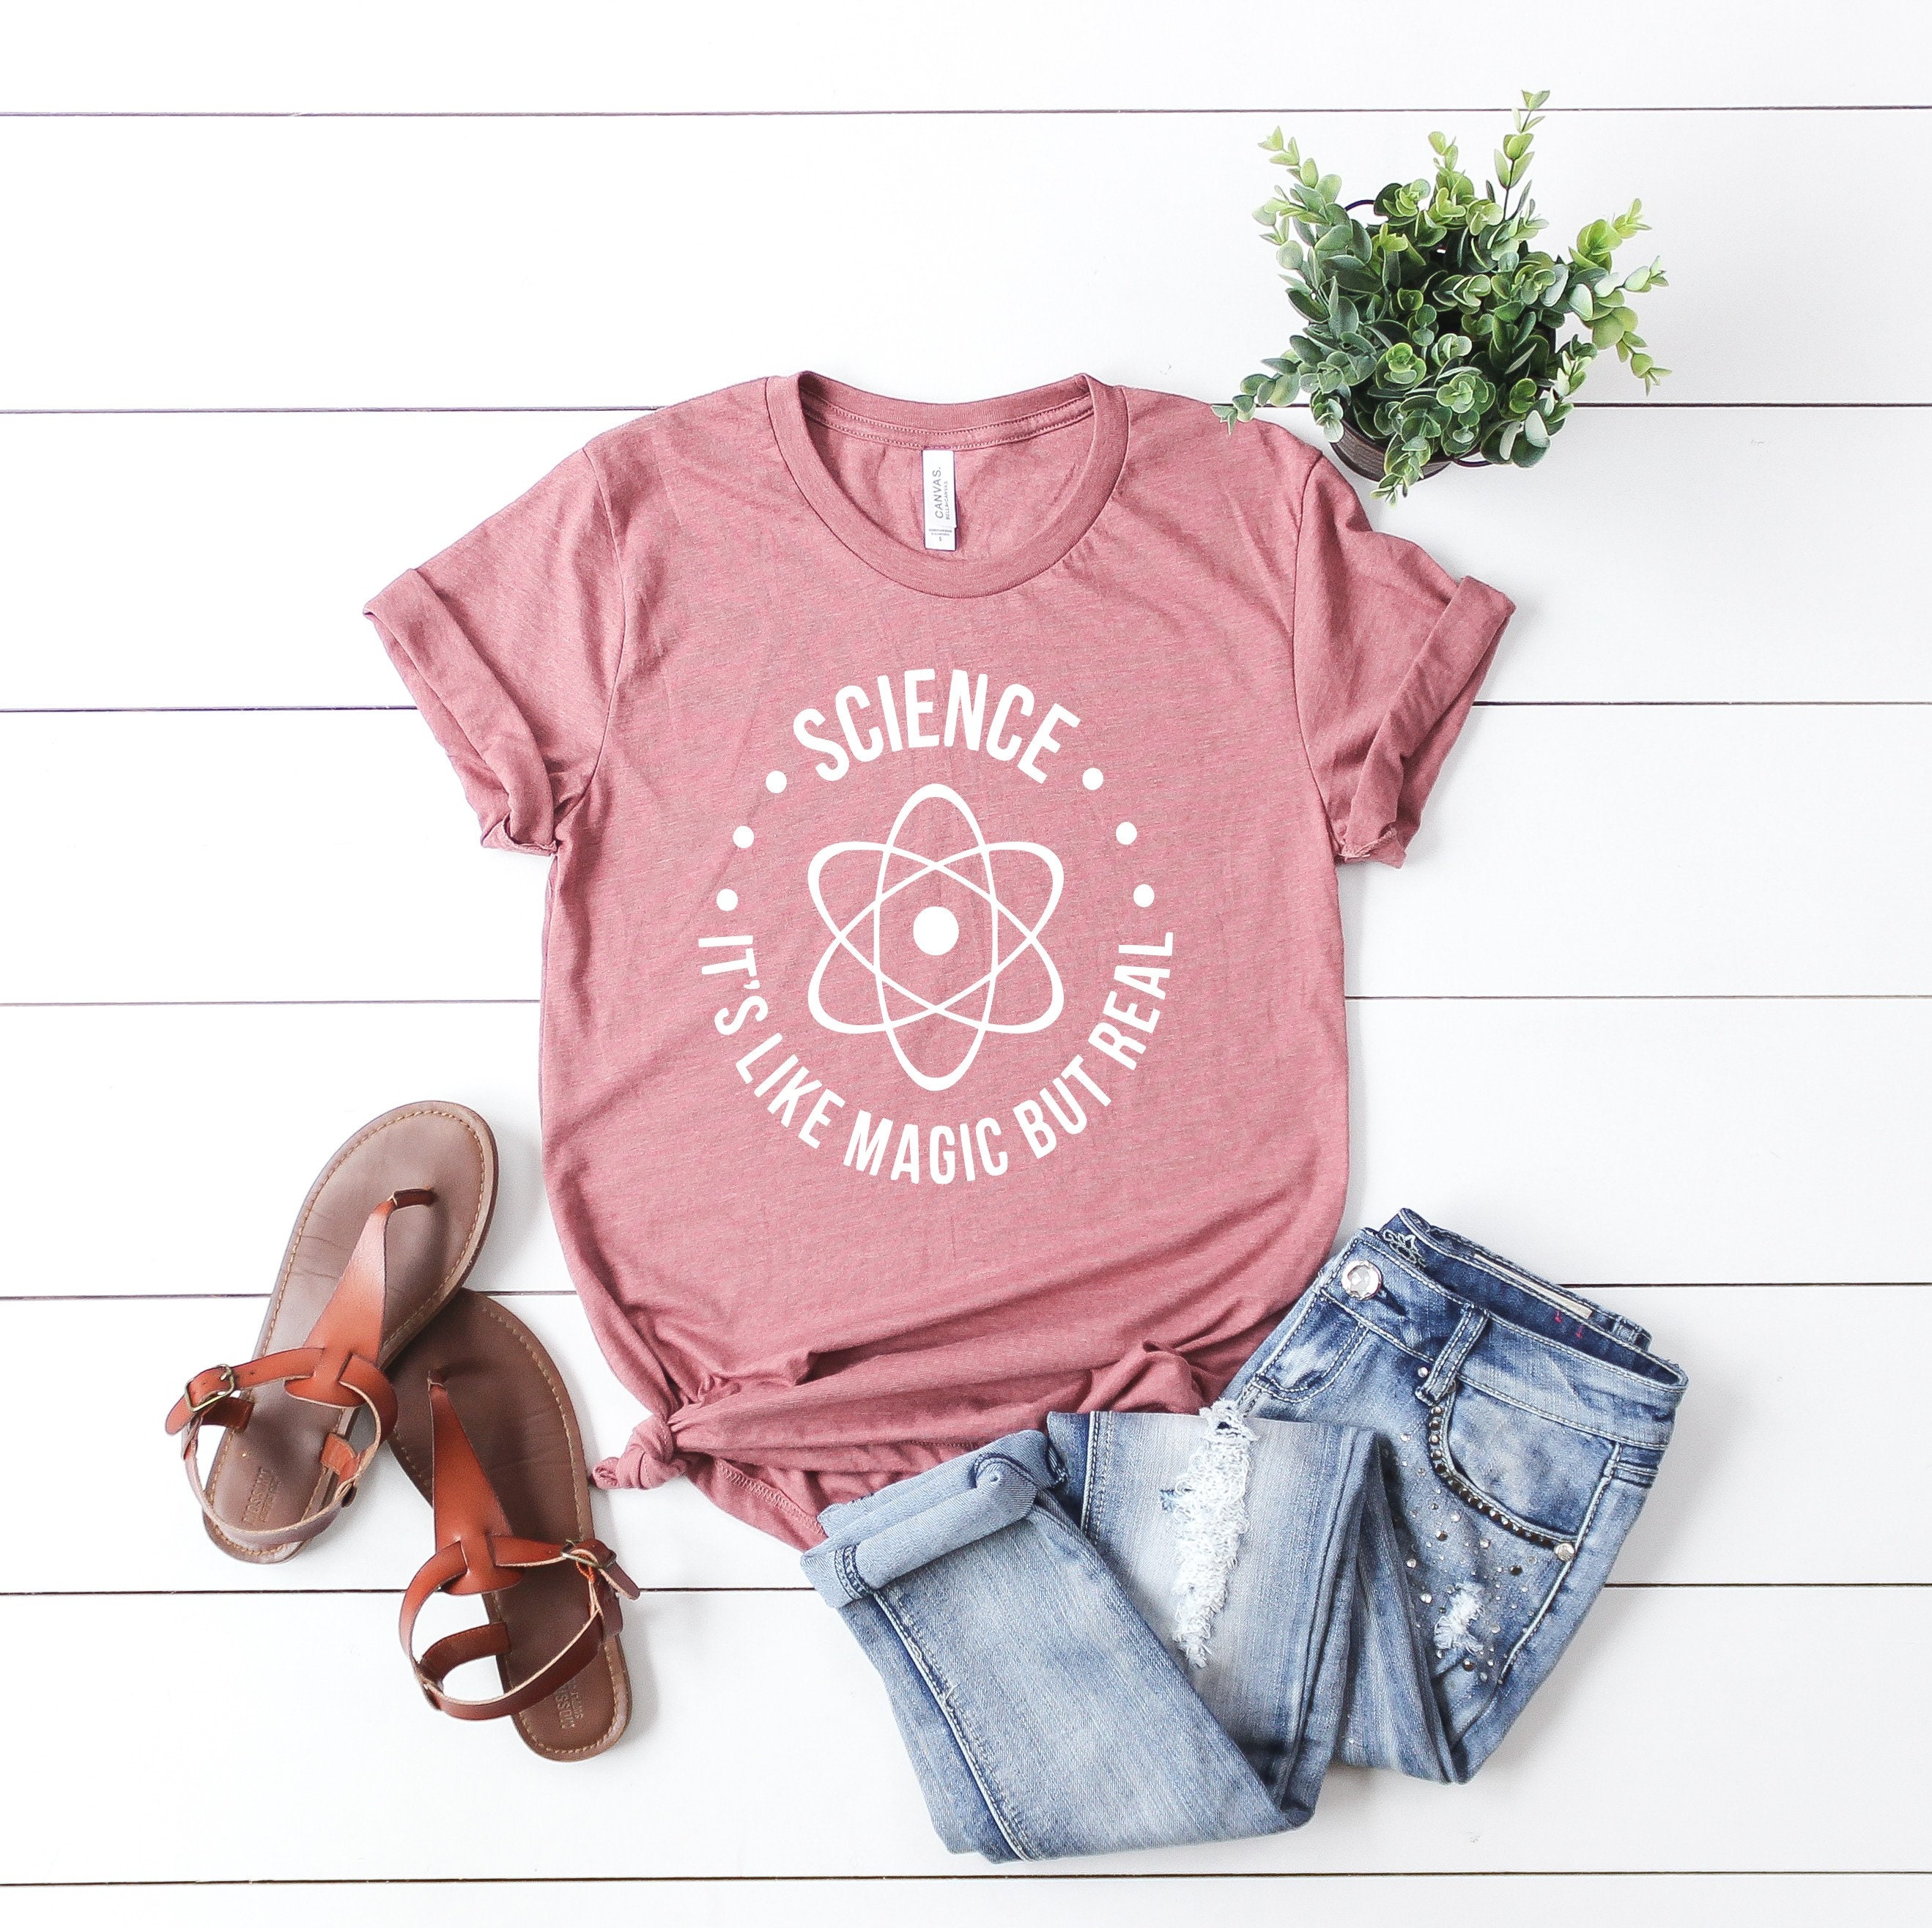 Discover Science Shirt, It's Like Magic But Real Shirt, Science Lover Shirt, Geek Shirt, Nerd Shirt, Sarcastic, For Men, For Women, Gift For Hers